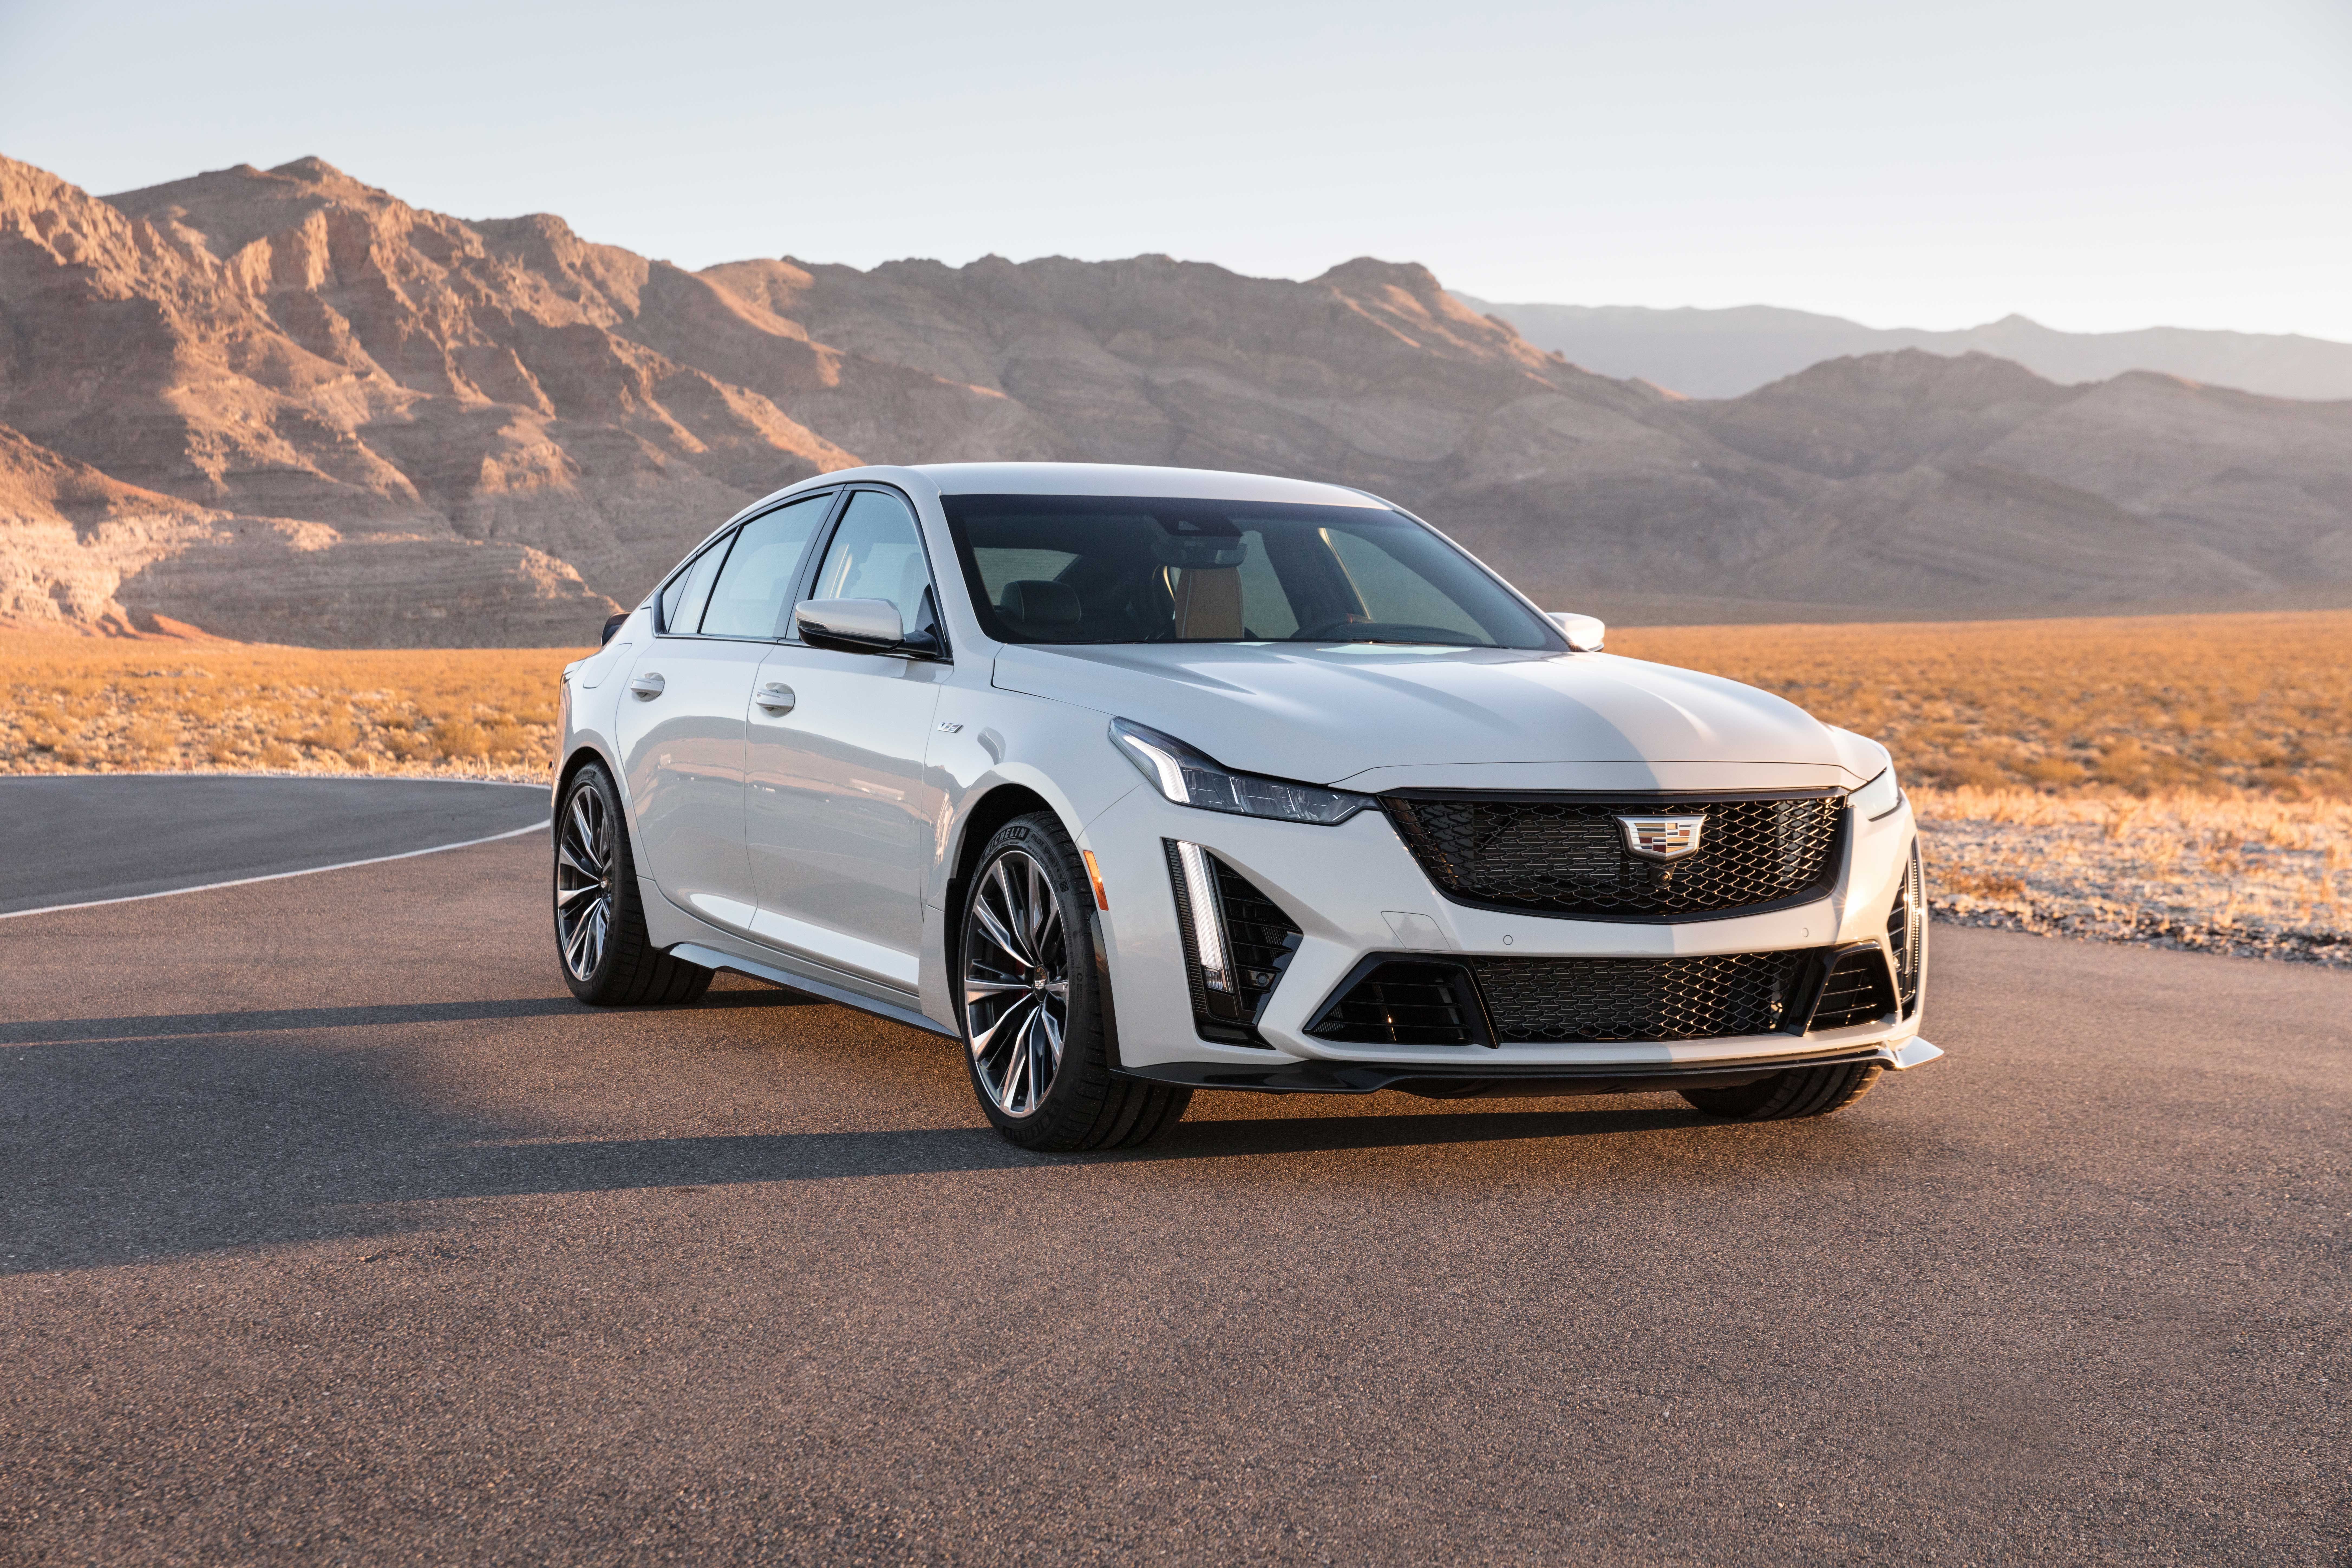 Cadillac Performance Is Here to Stay, Whether EV or ICE